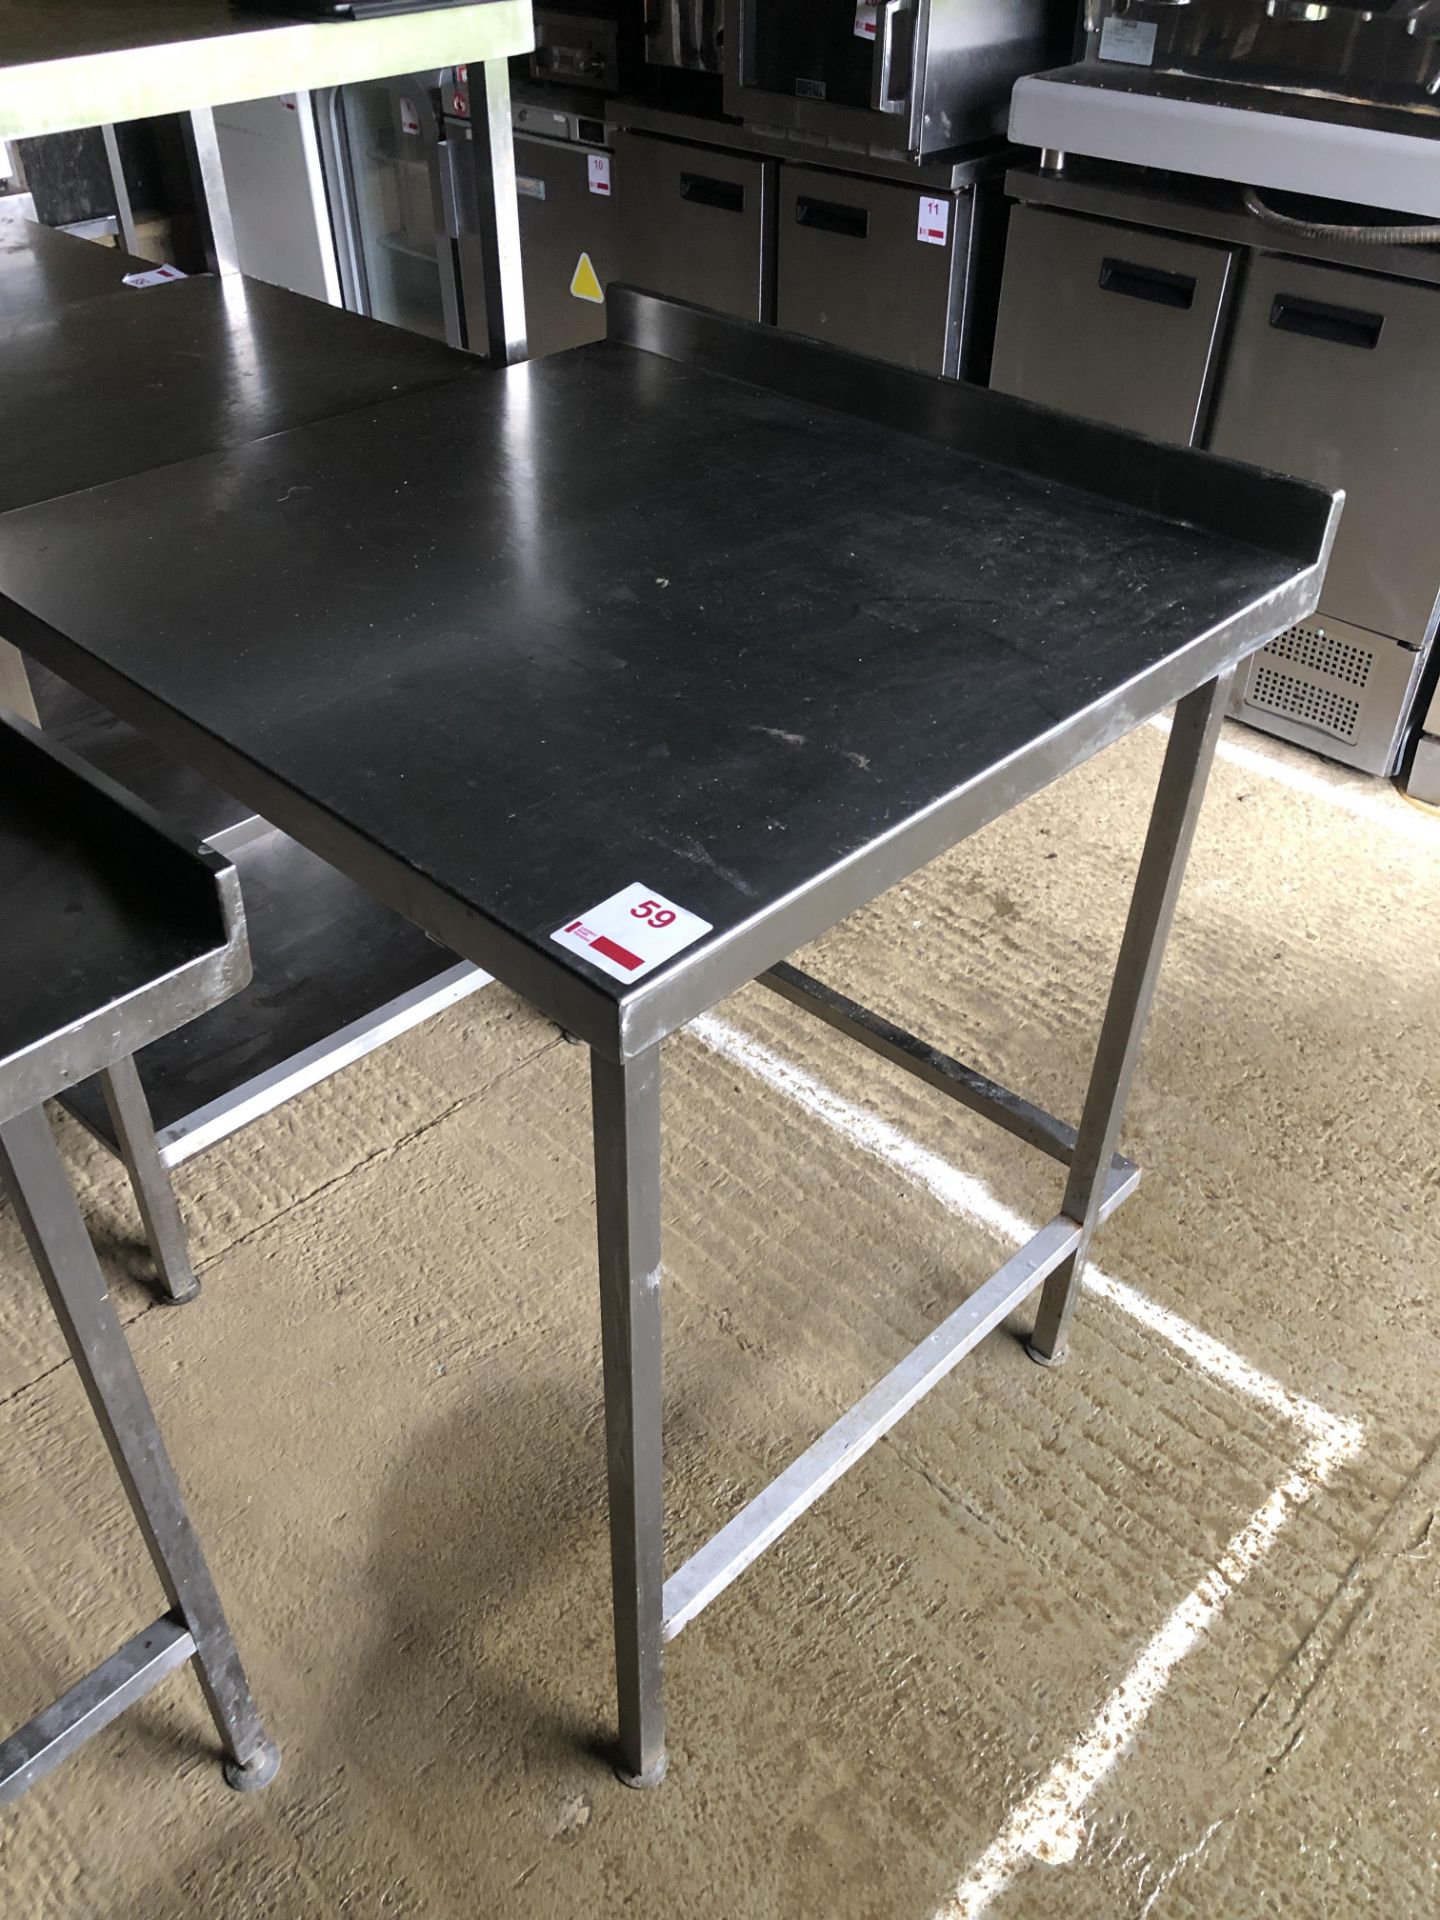 Stainless steel preparation table, approx 850mm x 800mm